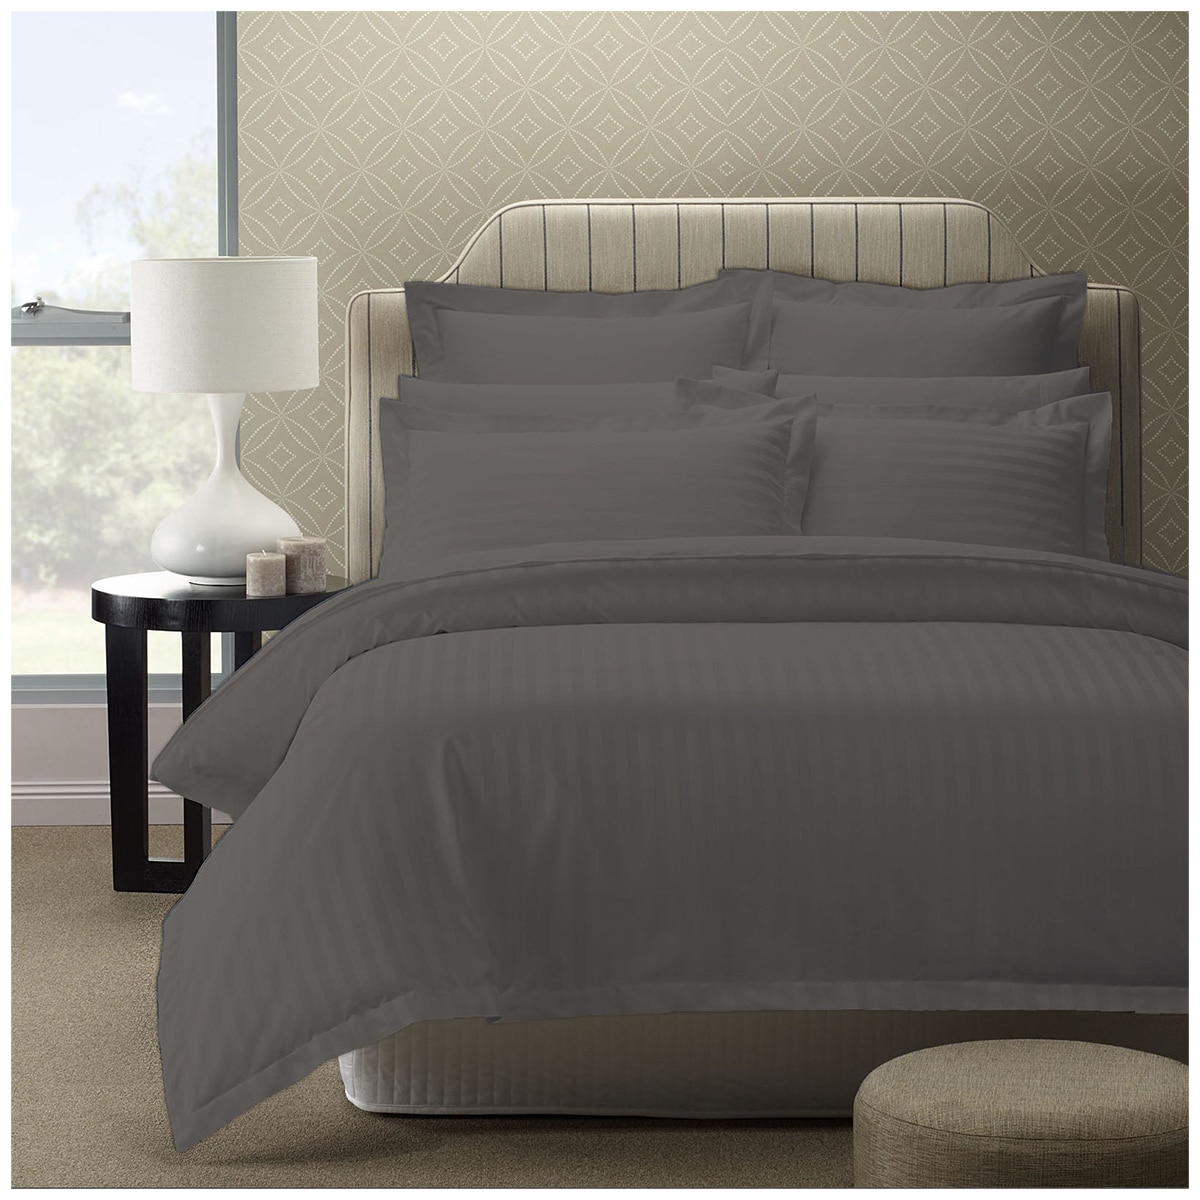 Bdirect Royal Comfort 1200 Thread count Damask Stripe Cotton Blend Quilt Cover Sets King Charcoal Grey